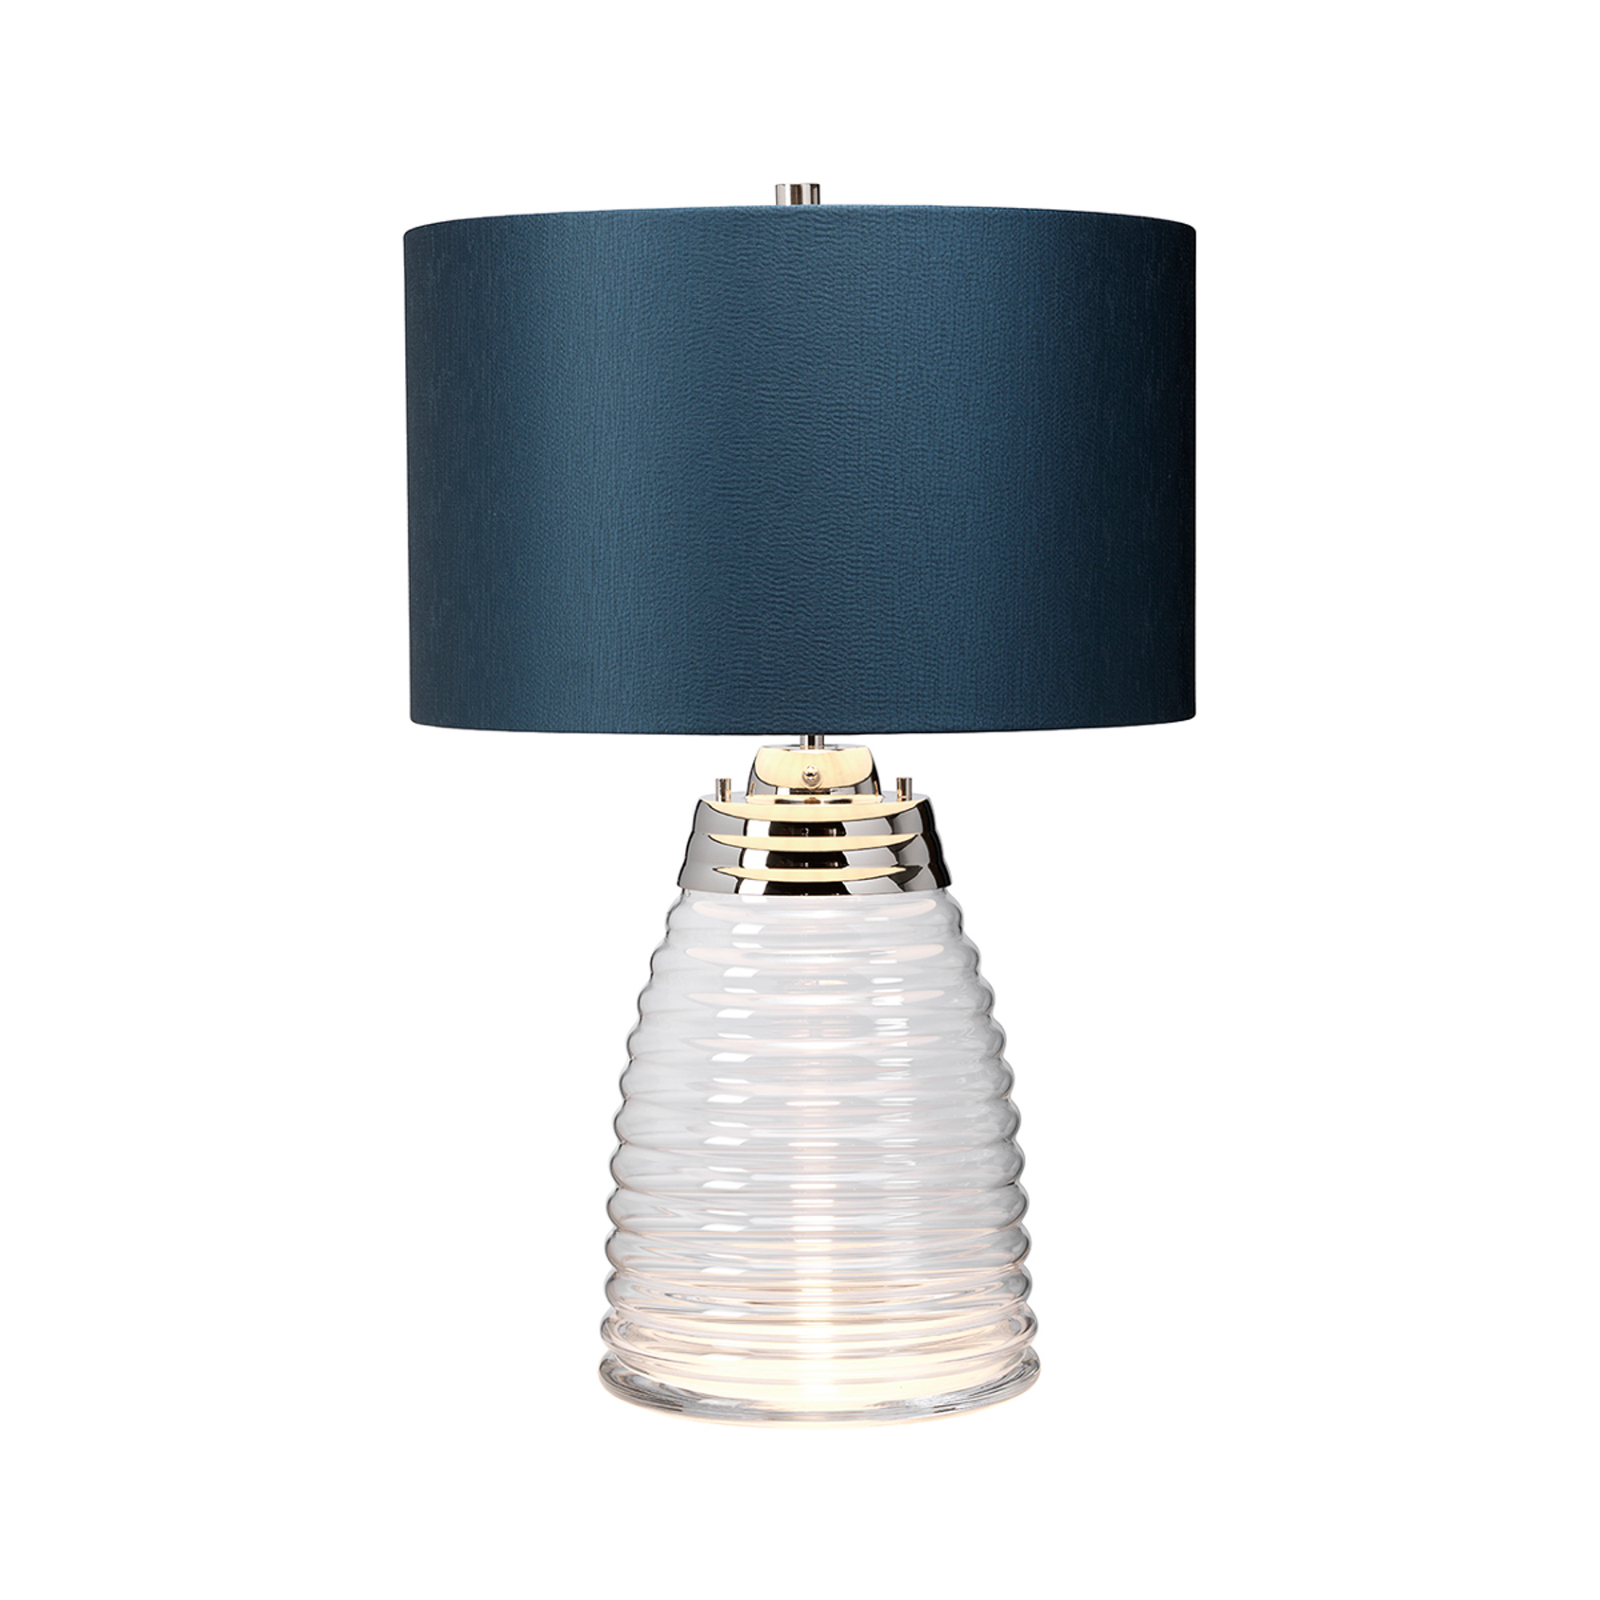 Milne table lamp glass base blue lampshade